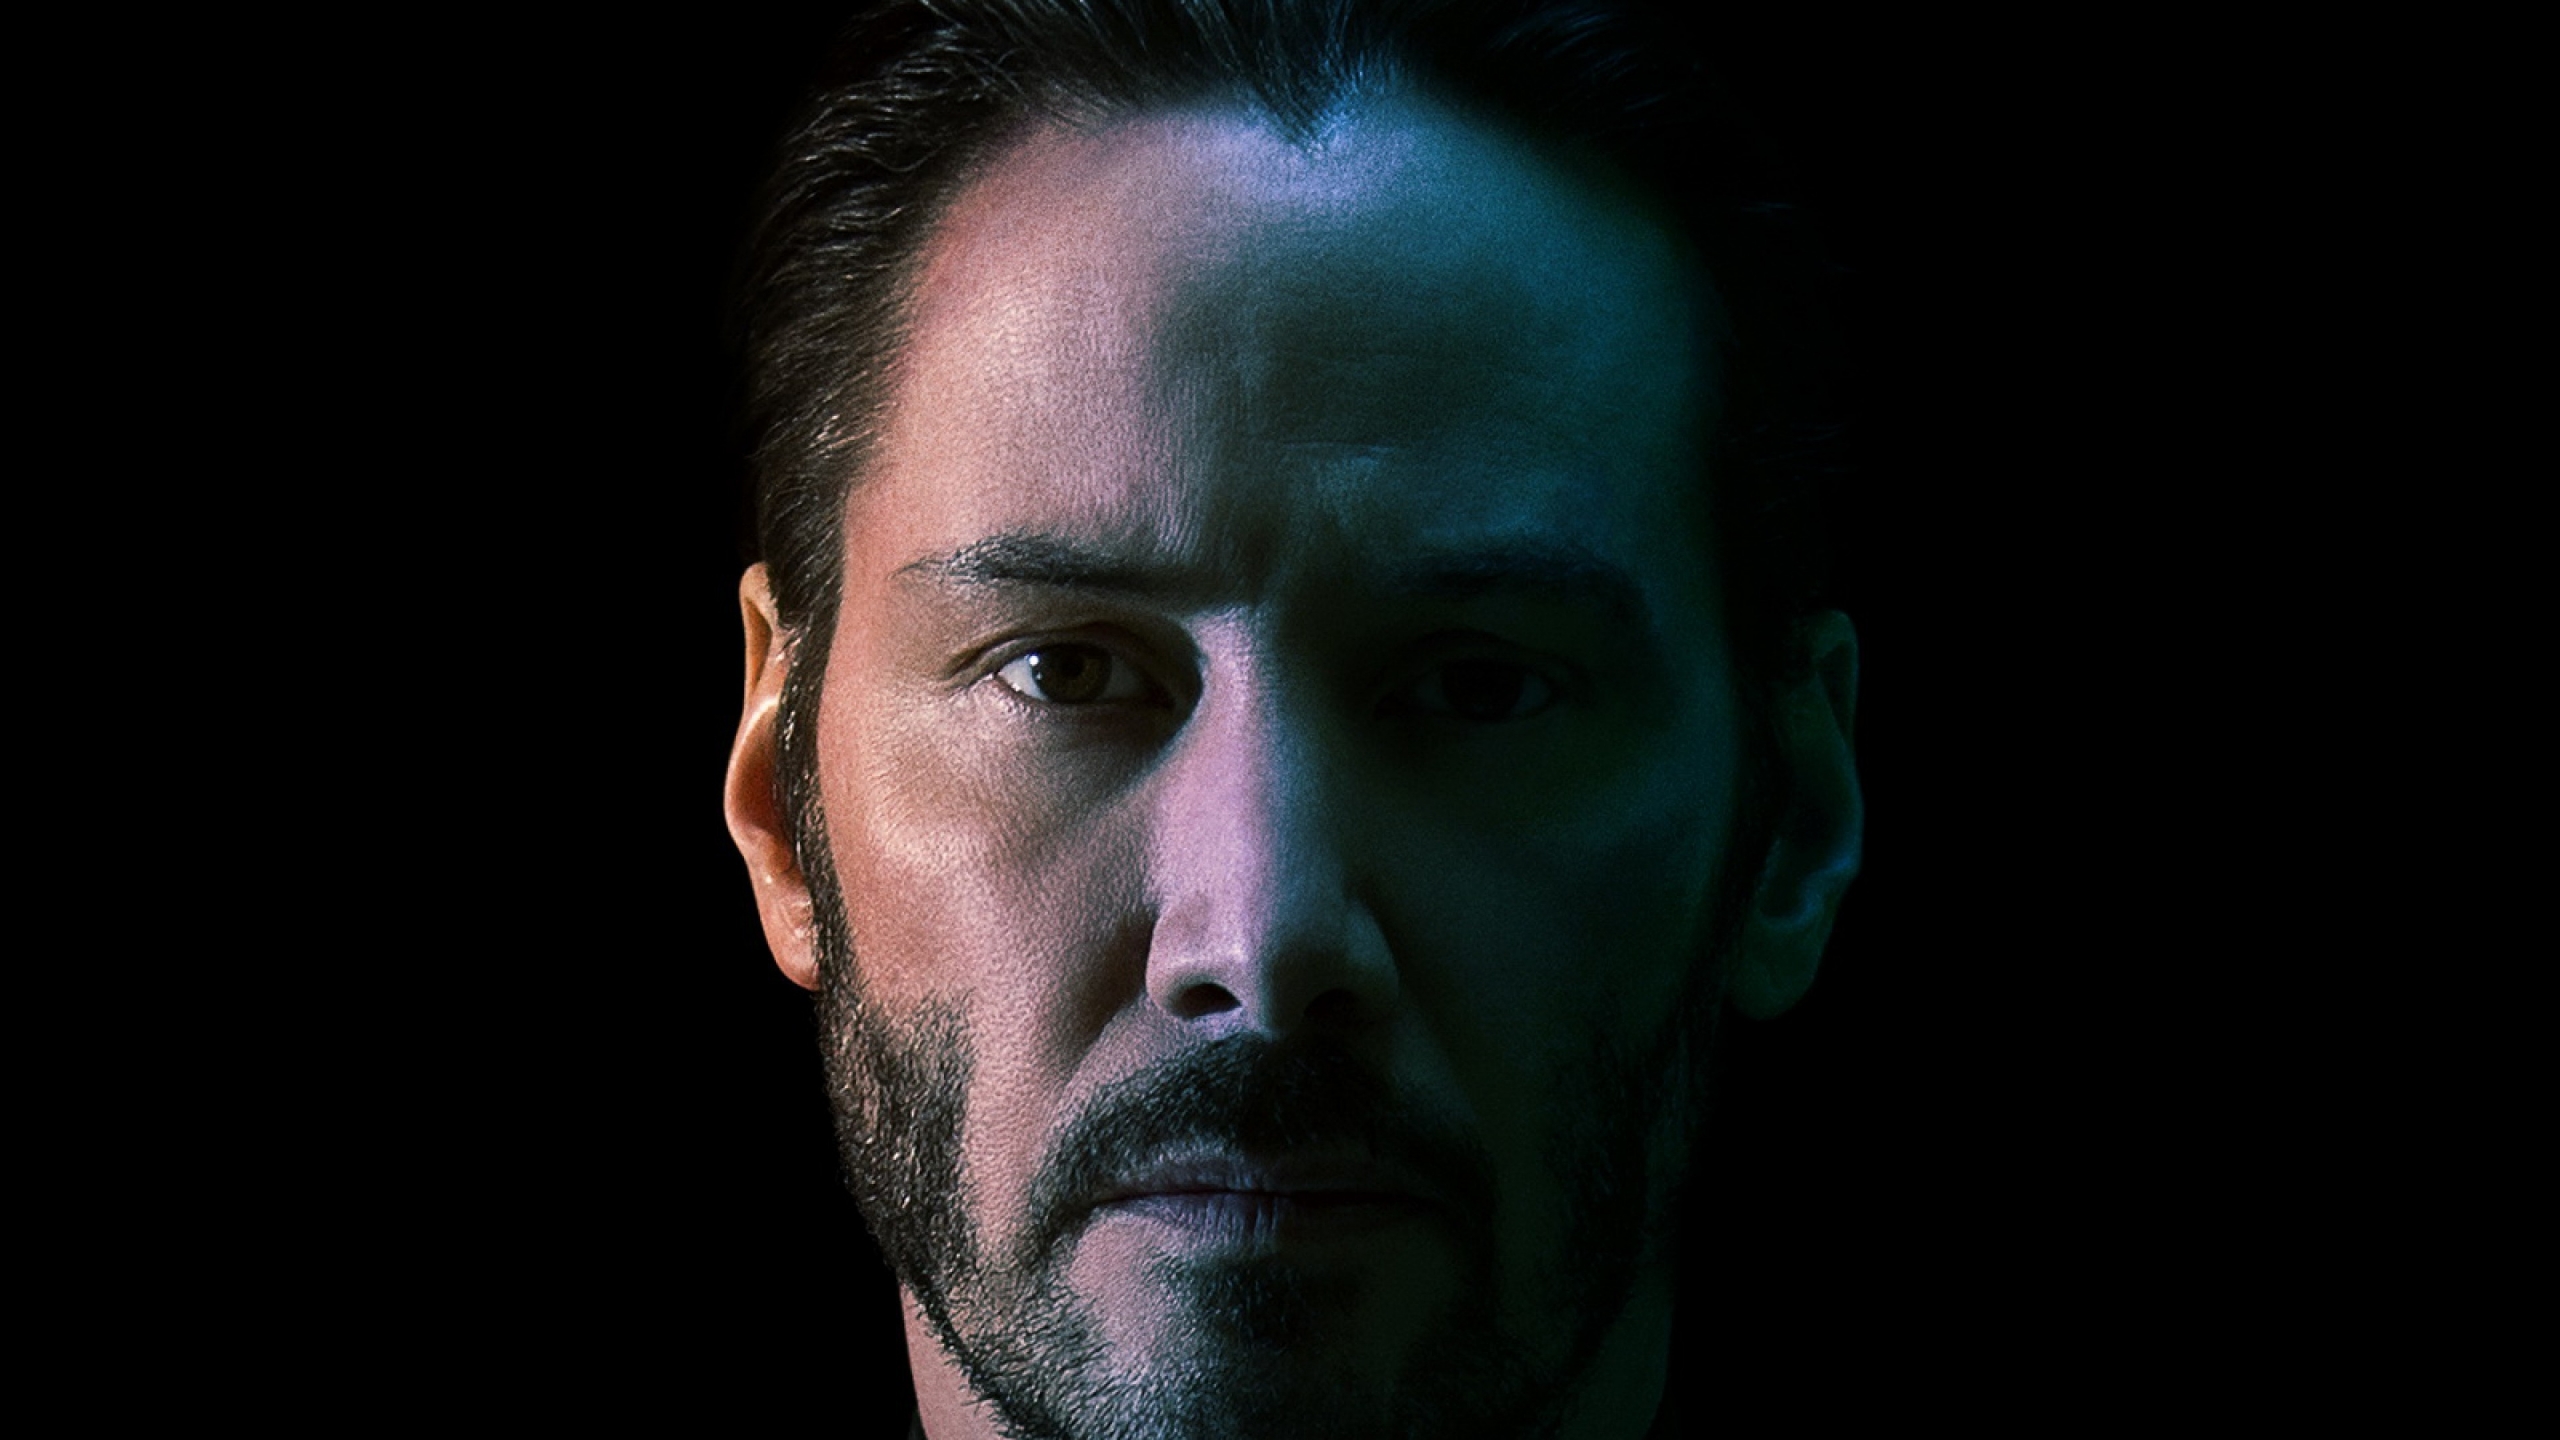 Keanu Reeves as John Wick for 2560x1440 HDTV resolution